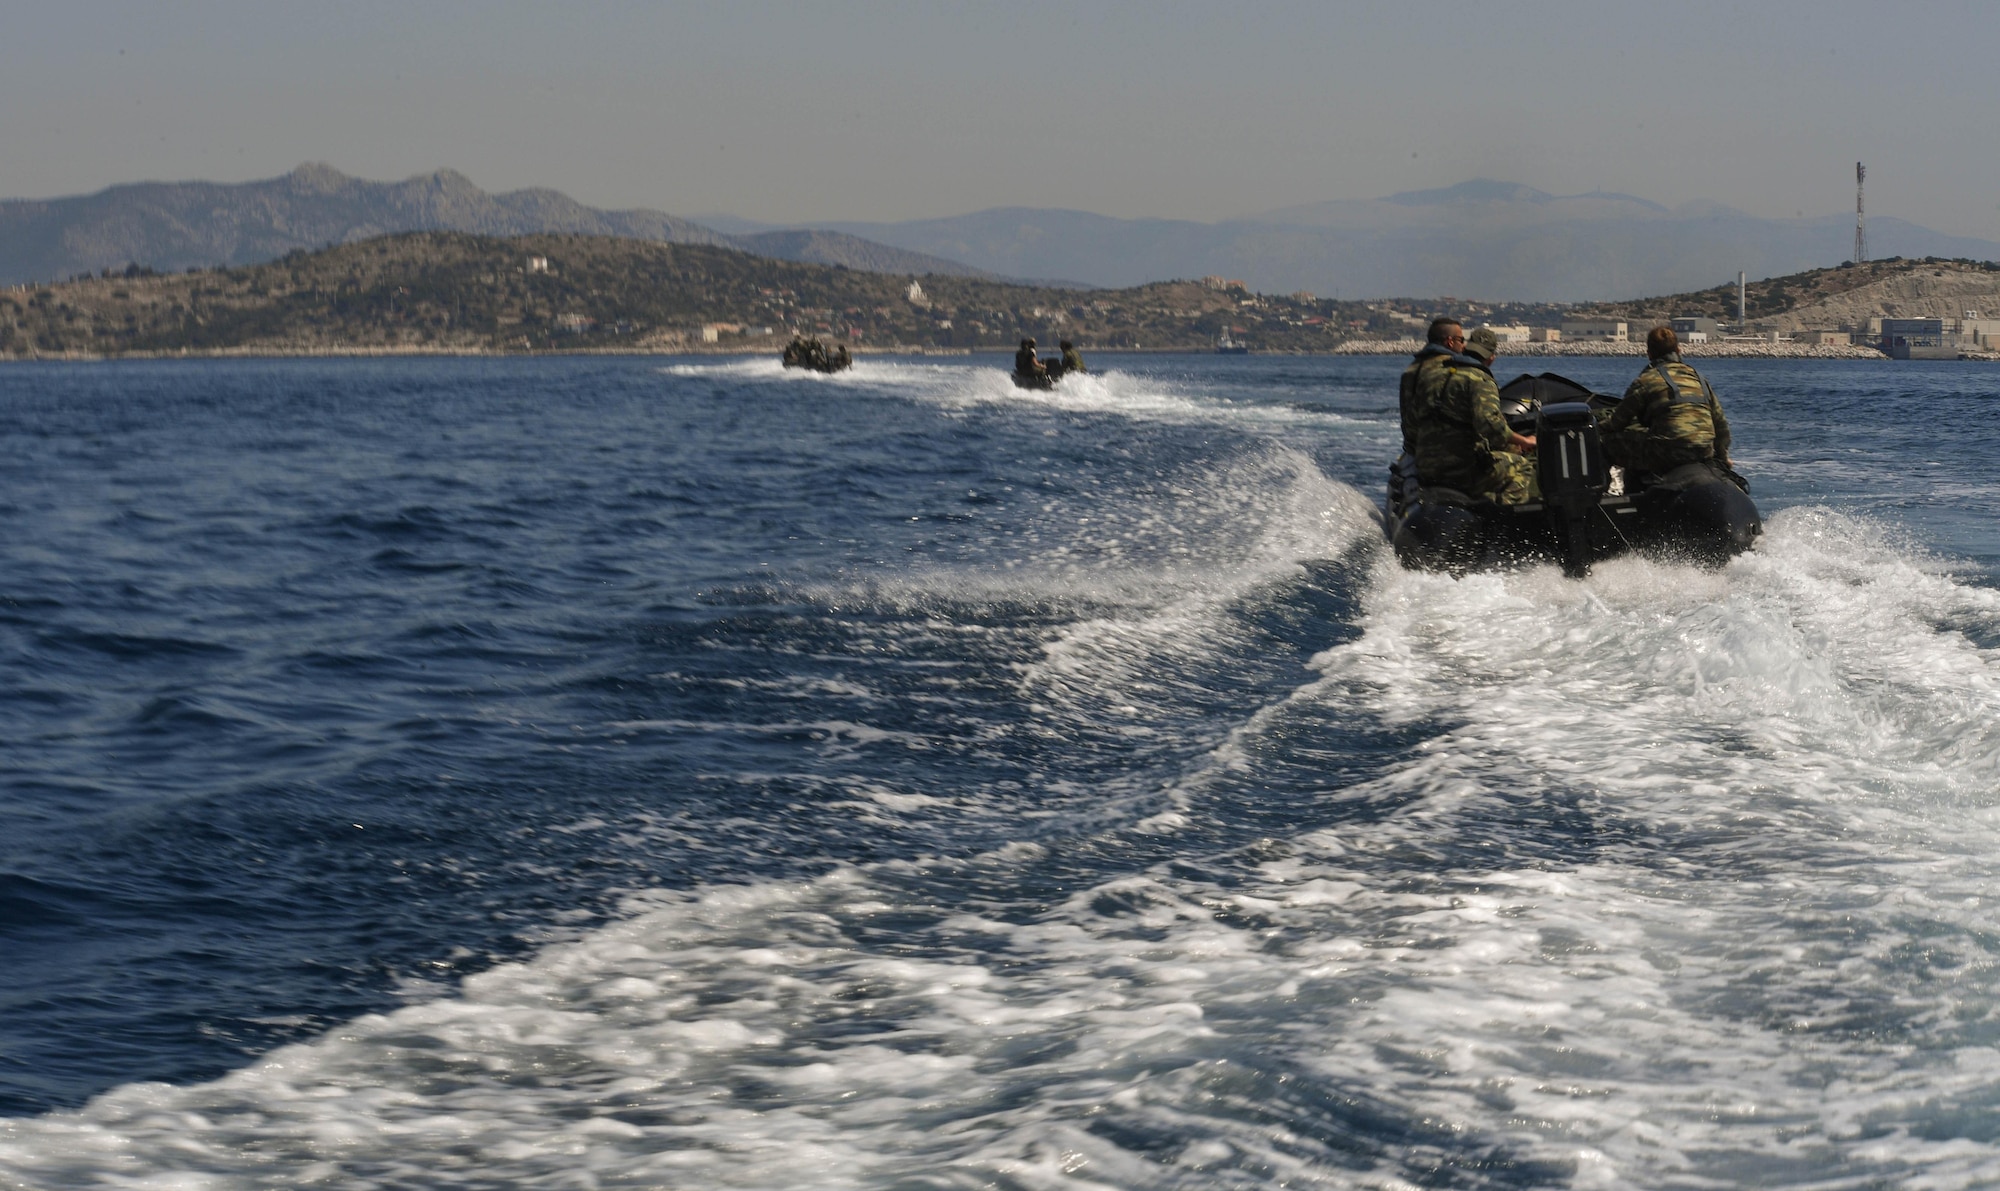 U.S. and Greek servicemembers return to shore after participating in a sea-rescue and rigging alternate method zodiac kit air drop during Exercise Stolen Cerberus IV near Elefsis Air Base, Greece, April 27, 2017. The sea-rescue and RAMZ kit, along with six Greek paratroopers, were dropped from a U.S. Air Force C-130J Super Hercules. U.S. Air Force and Army service members trained alongside the Hellenic air force in personnel and cargo drops during the fourth iteration of the exercise in Greece. (U.S Air Force photo by Senior Airman Tryphena Mayhugh)